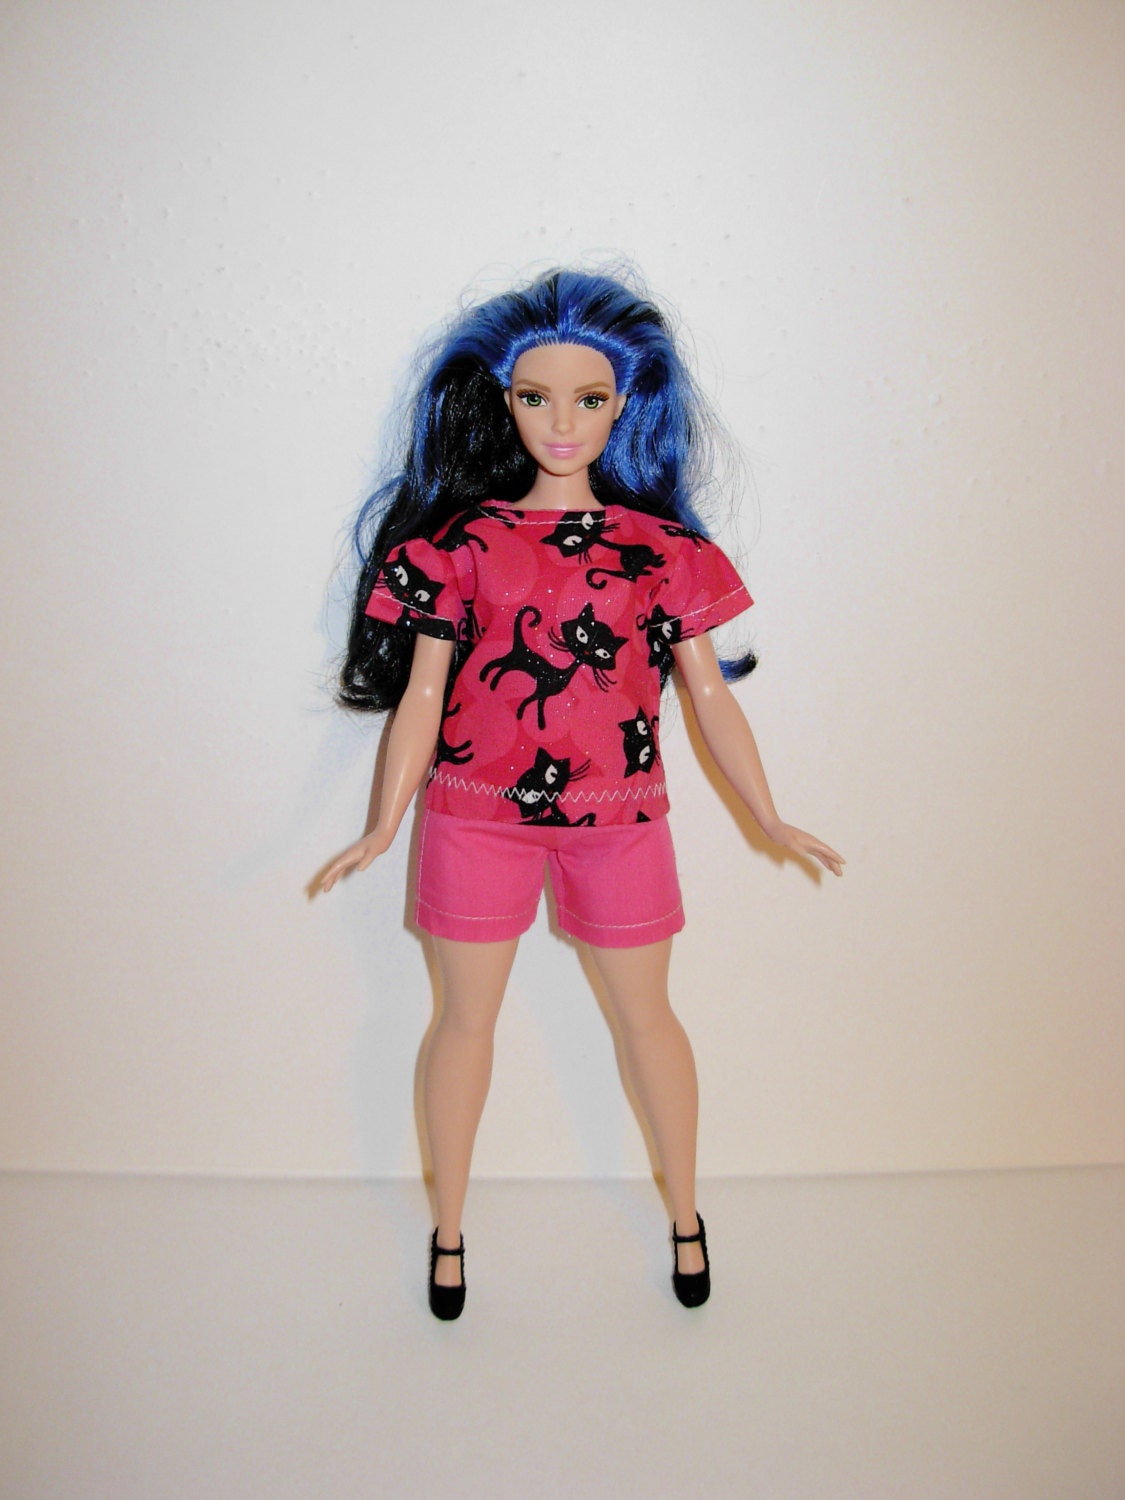 Handmade barbie clothes. Cute outfit for new barbie curvy doll